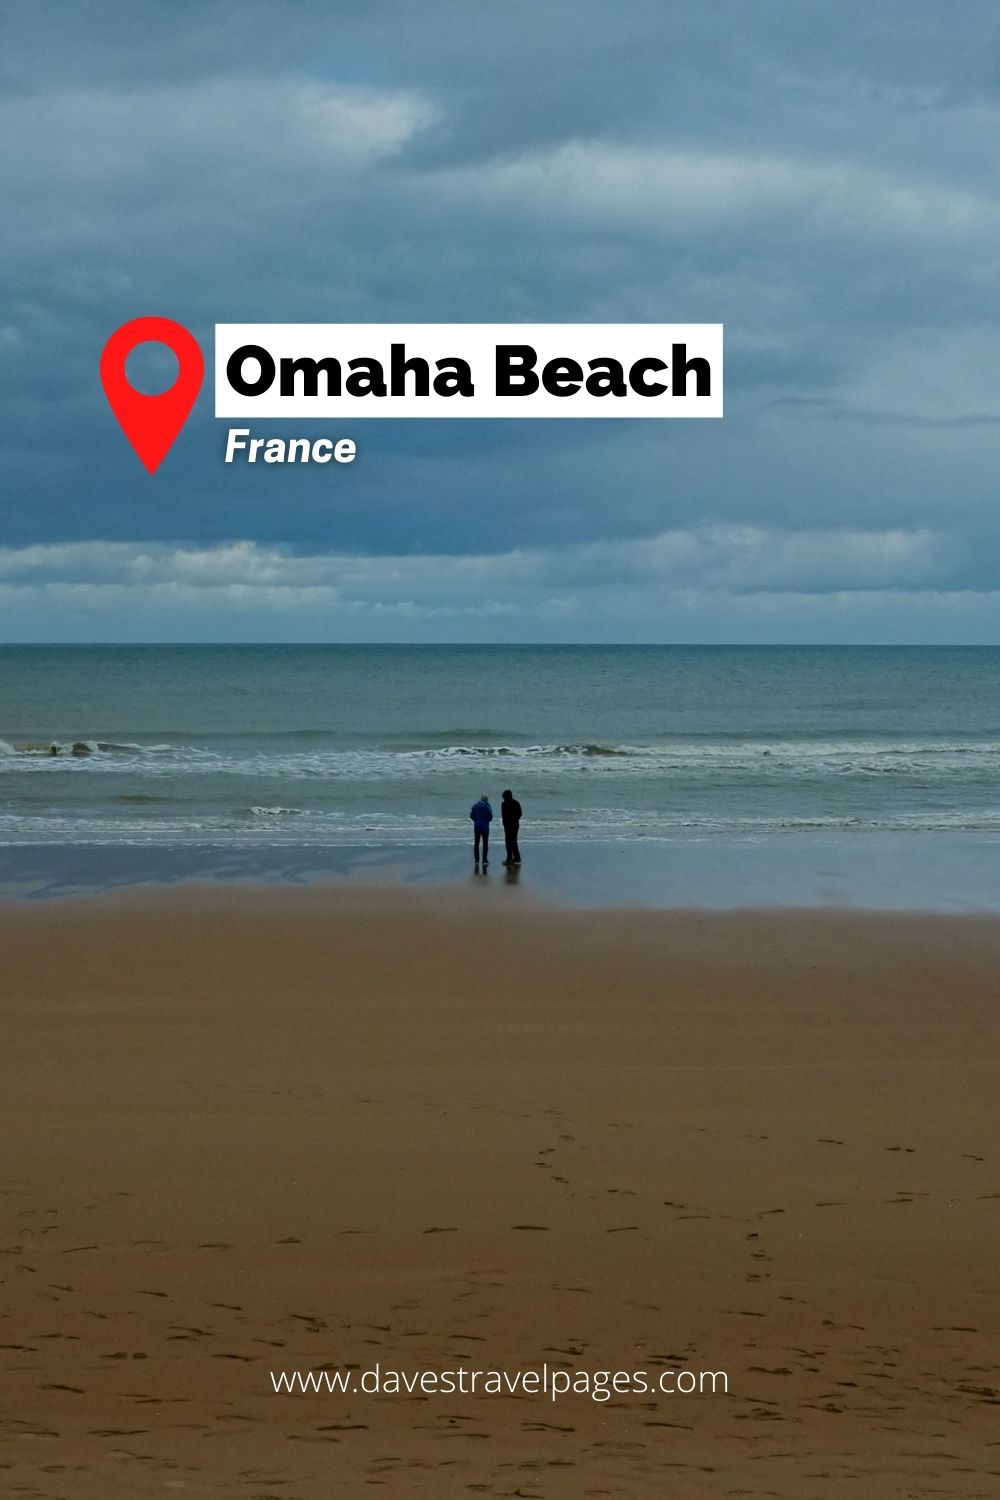 Omaha Beach - Places of historical significance in Europe